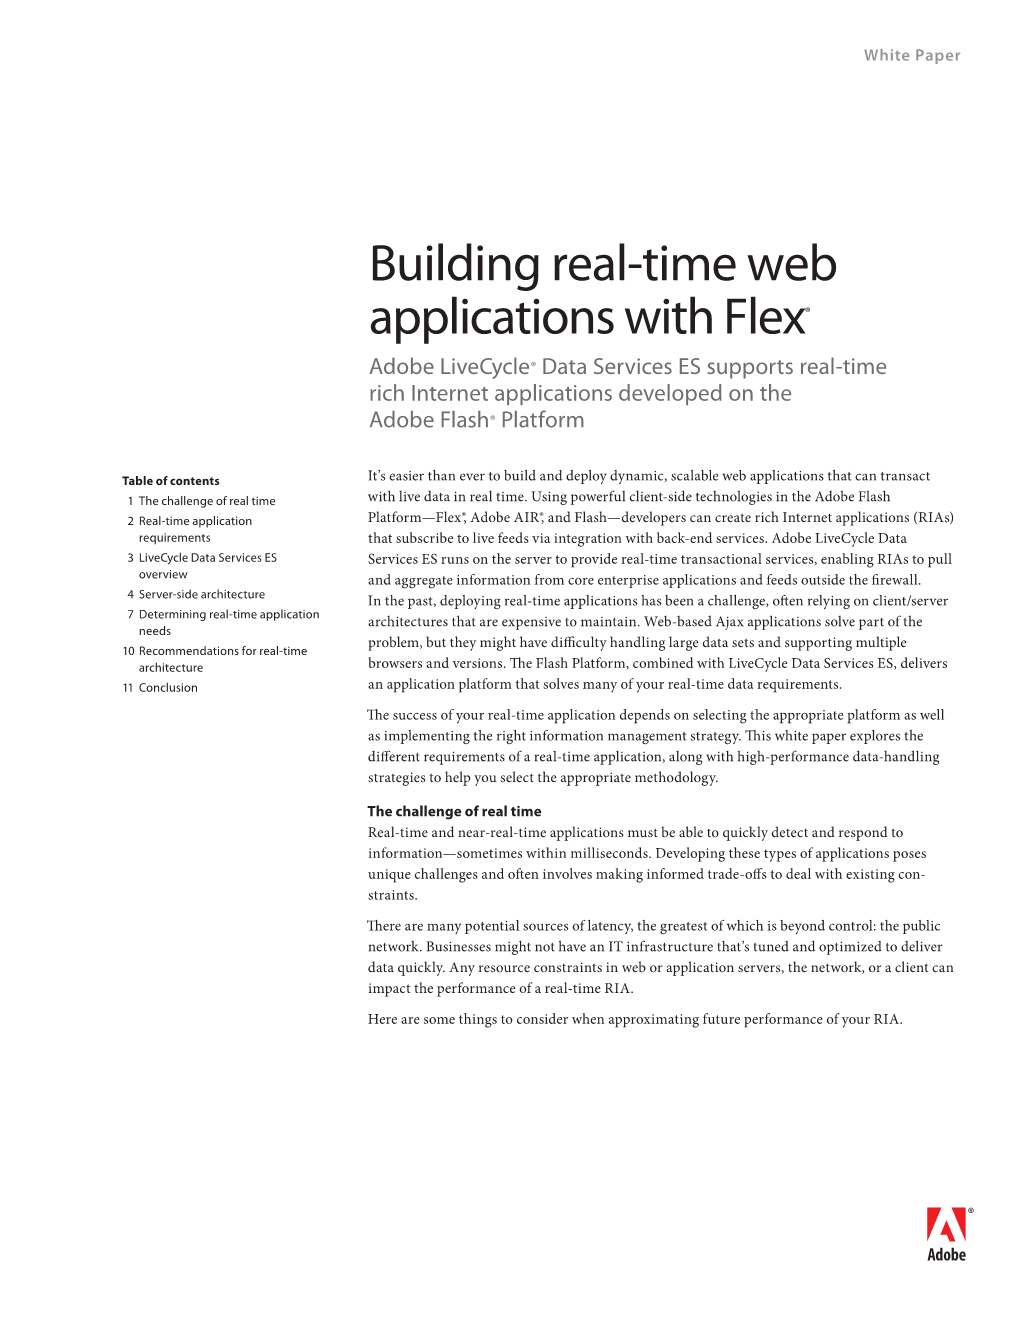 Flex and Livecycle Data Services Whitepaper